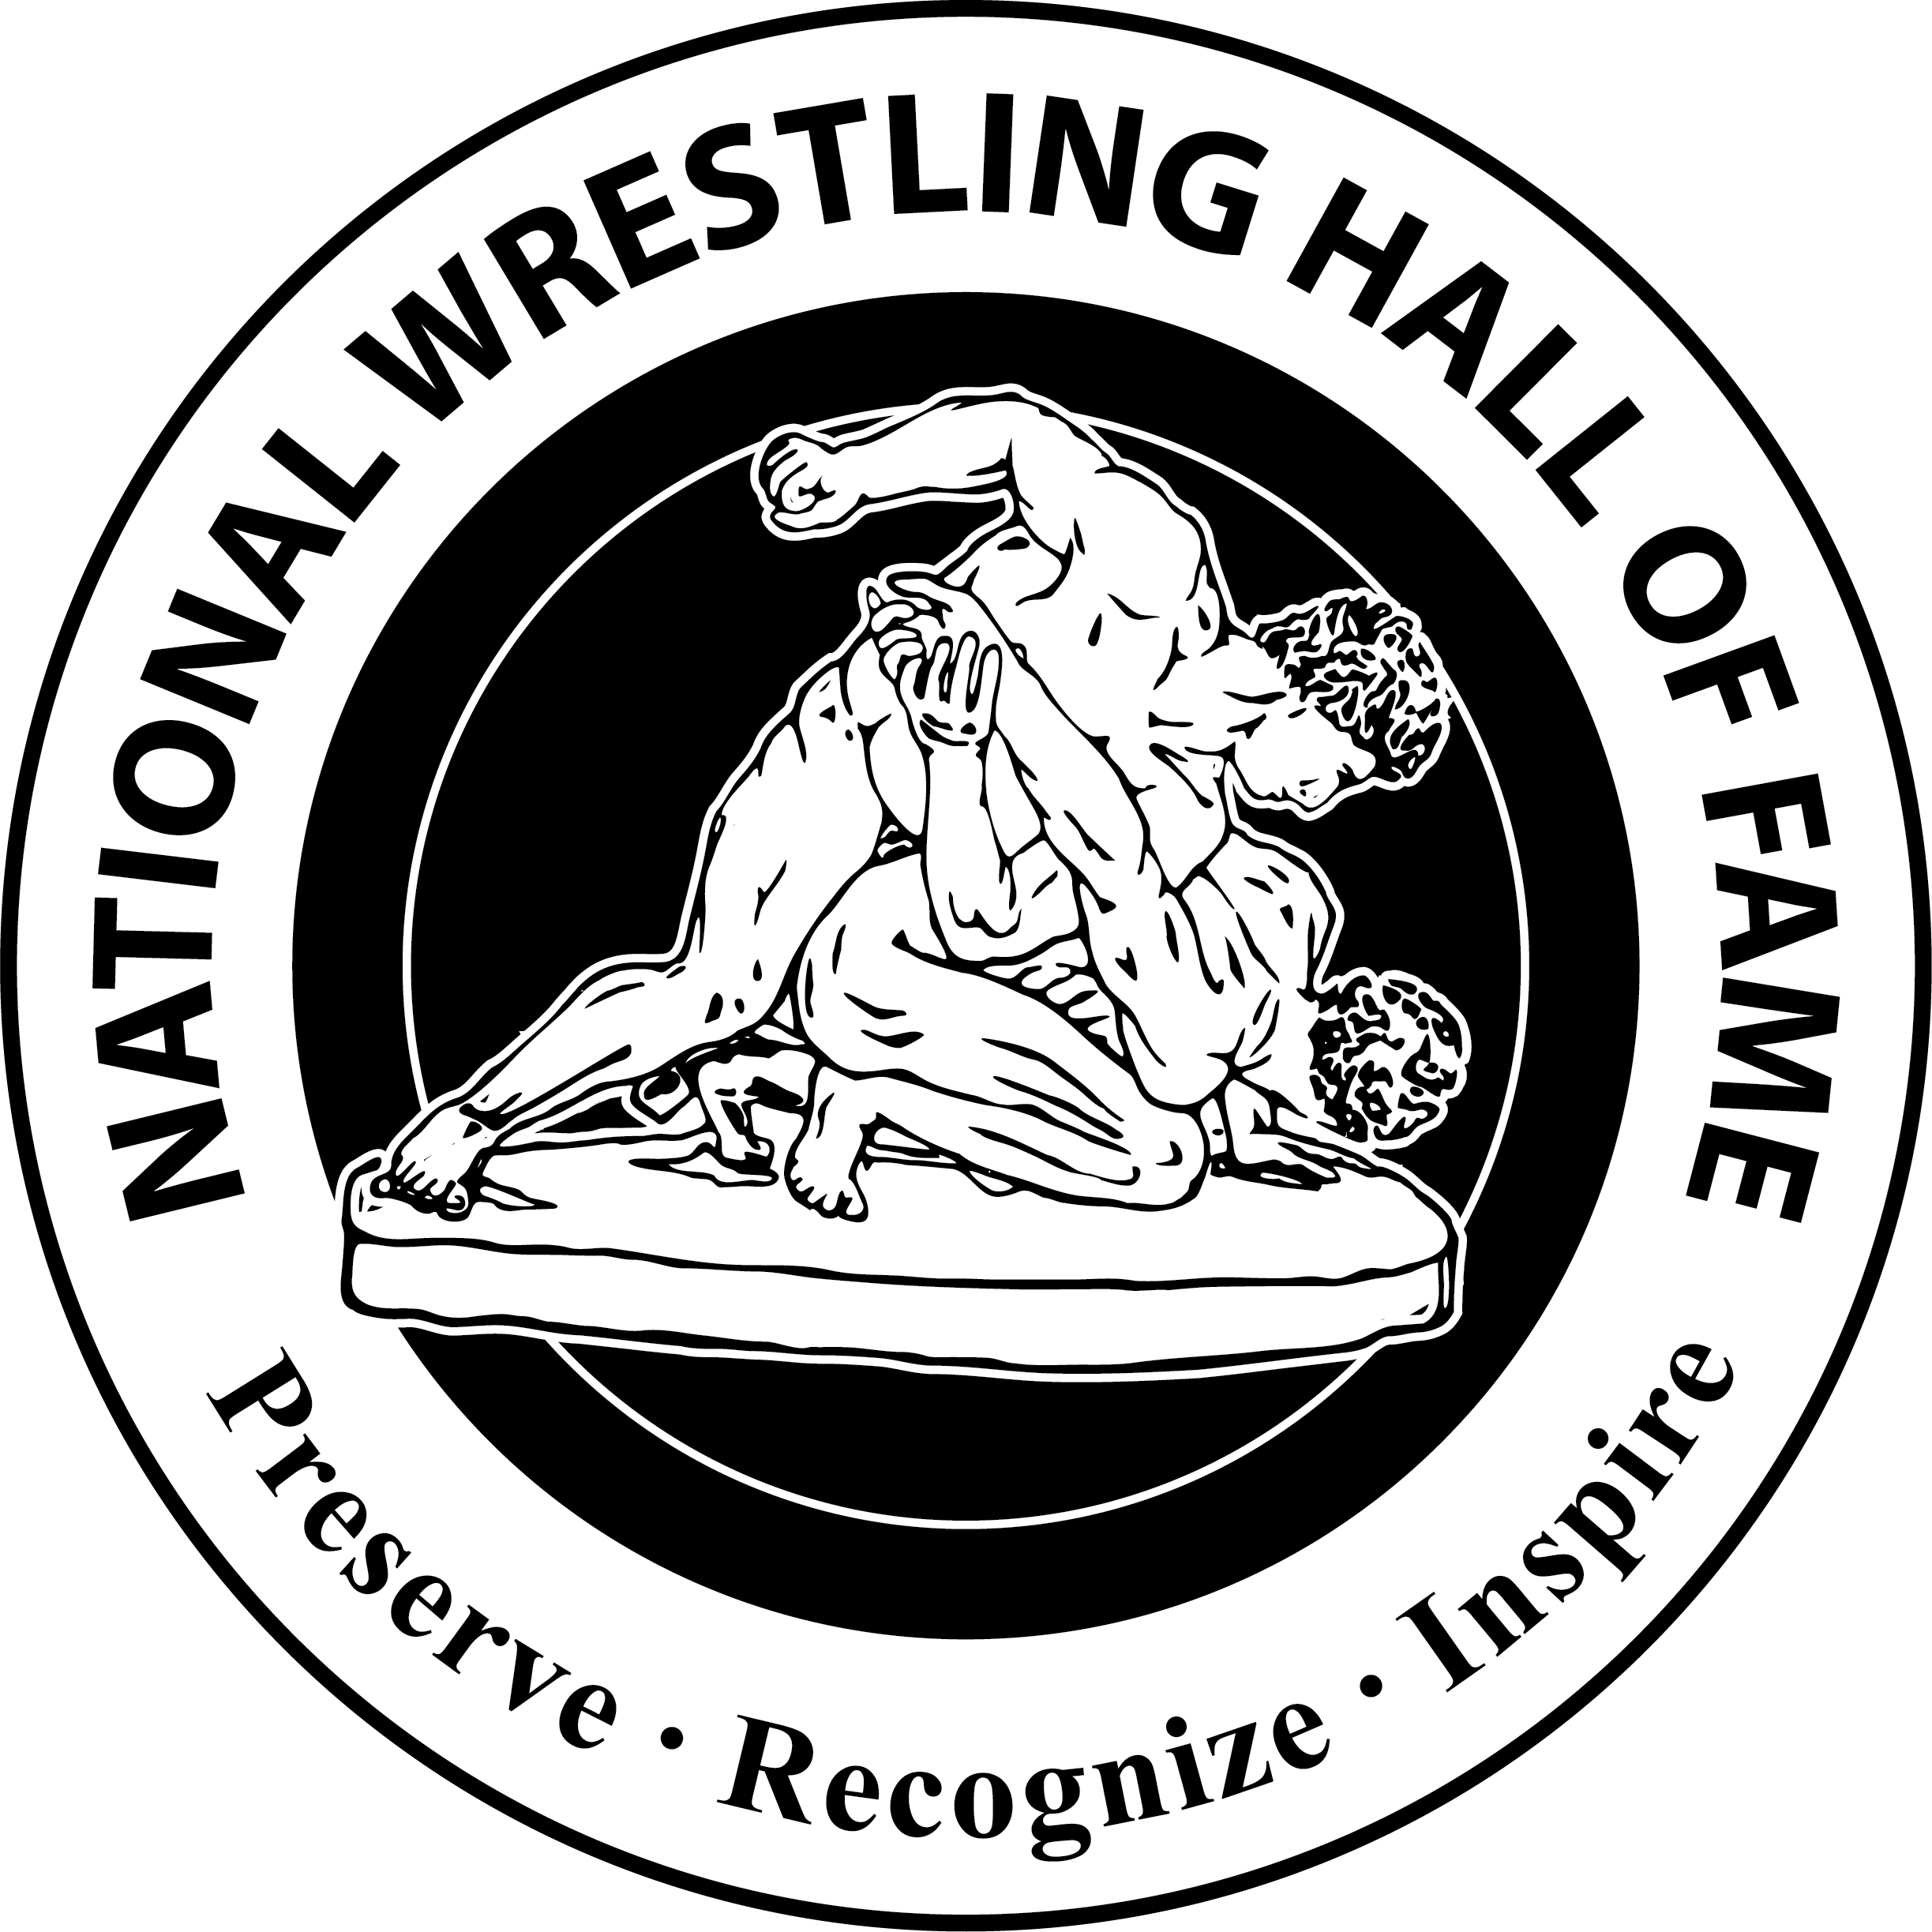 National Wrestling Hall of Fame and Museum 